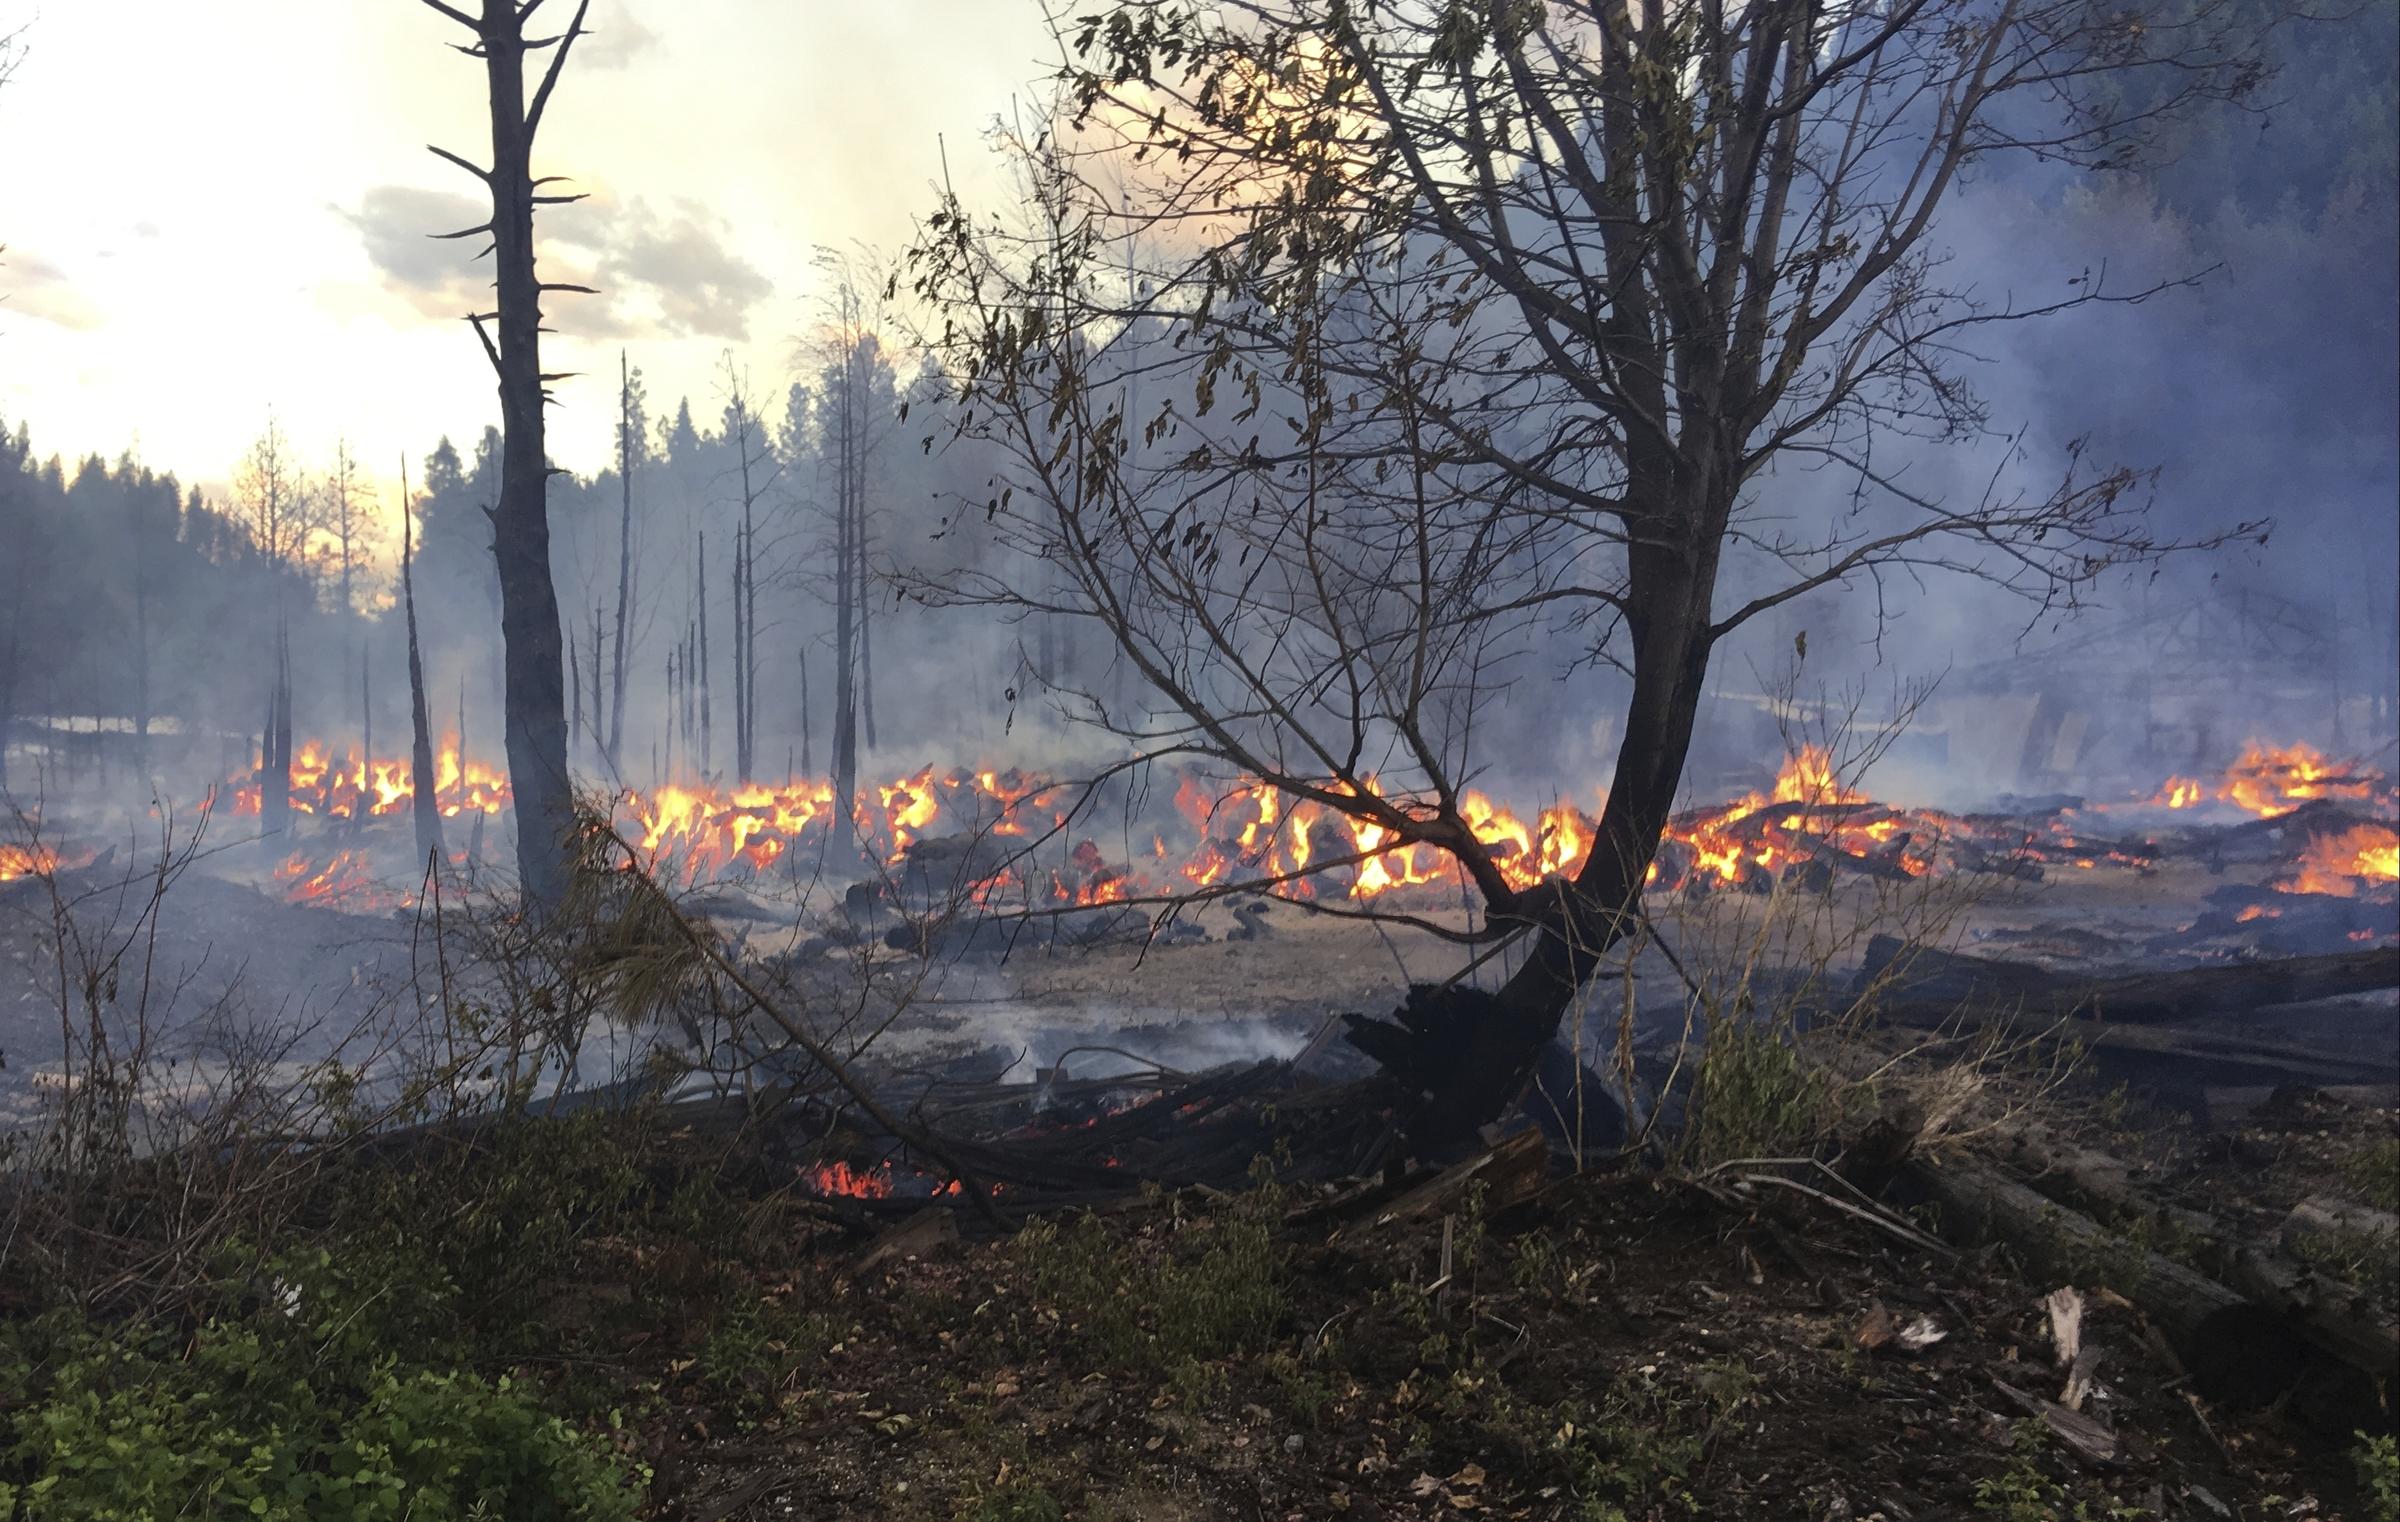 In this May 23, 2017 photo provided by Chelan County Fire District 3, logs burn near Leavenworth, Wash. The wildfire prompted evacuation orders for homes and cabins at a popular Washington state hiking and skiing destination. CREDIT: BEN TORKELSON